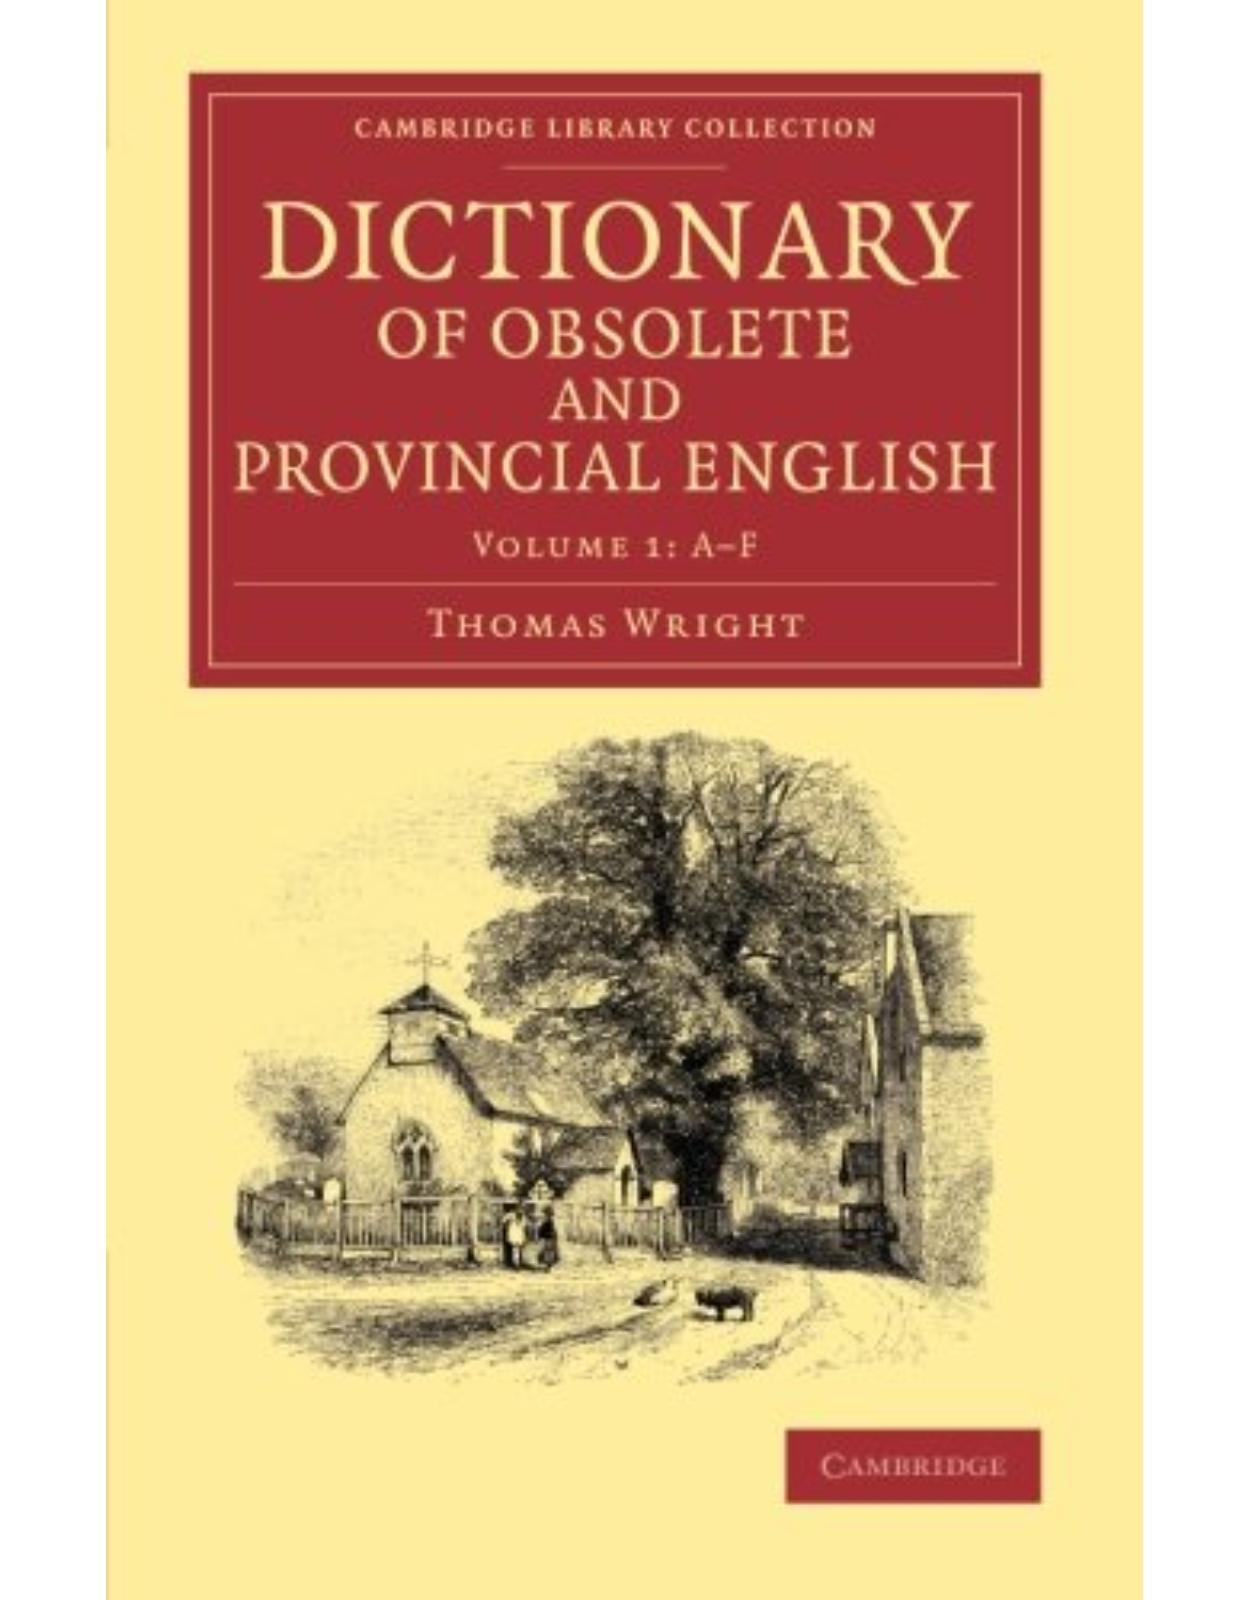  Dictionary of Obsolete and Provincial English 2 Volume Set: Dictionary of Obsolete and Provincial English: Containing Words from the English Writers ... (Cambridge Library Collection - Linguistics) Paperback – 28 Aug 2014